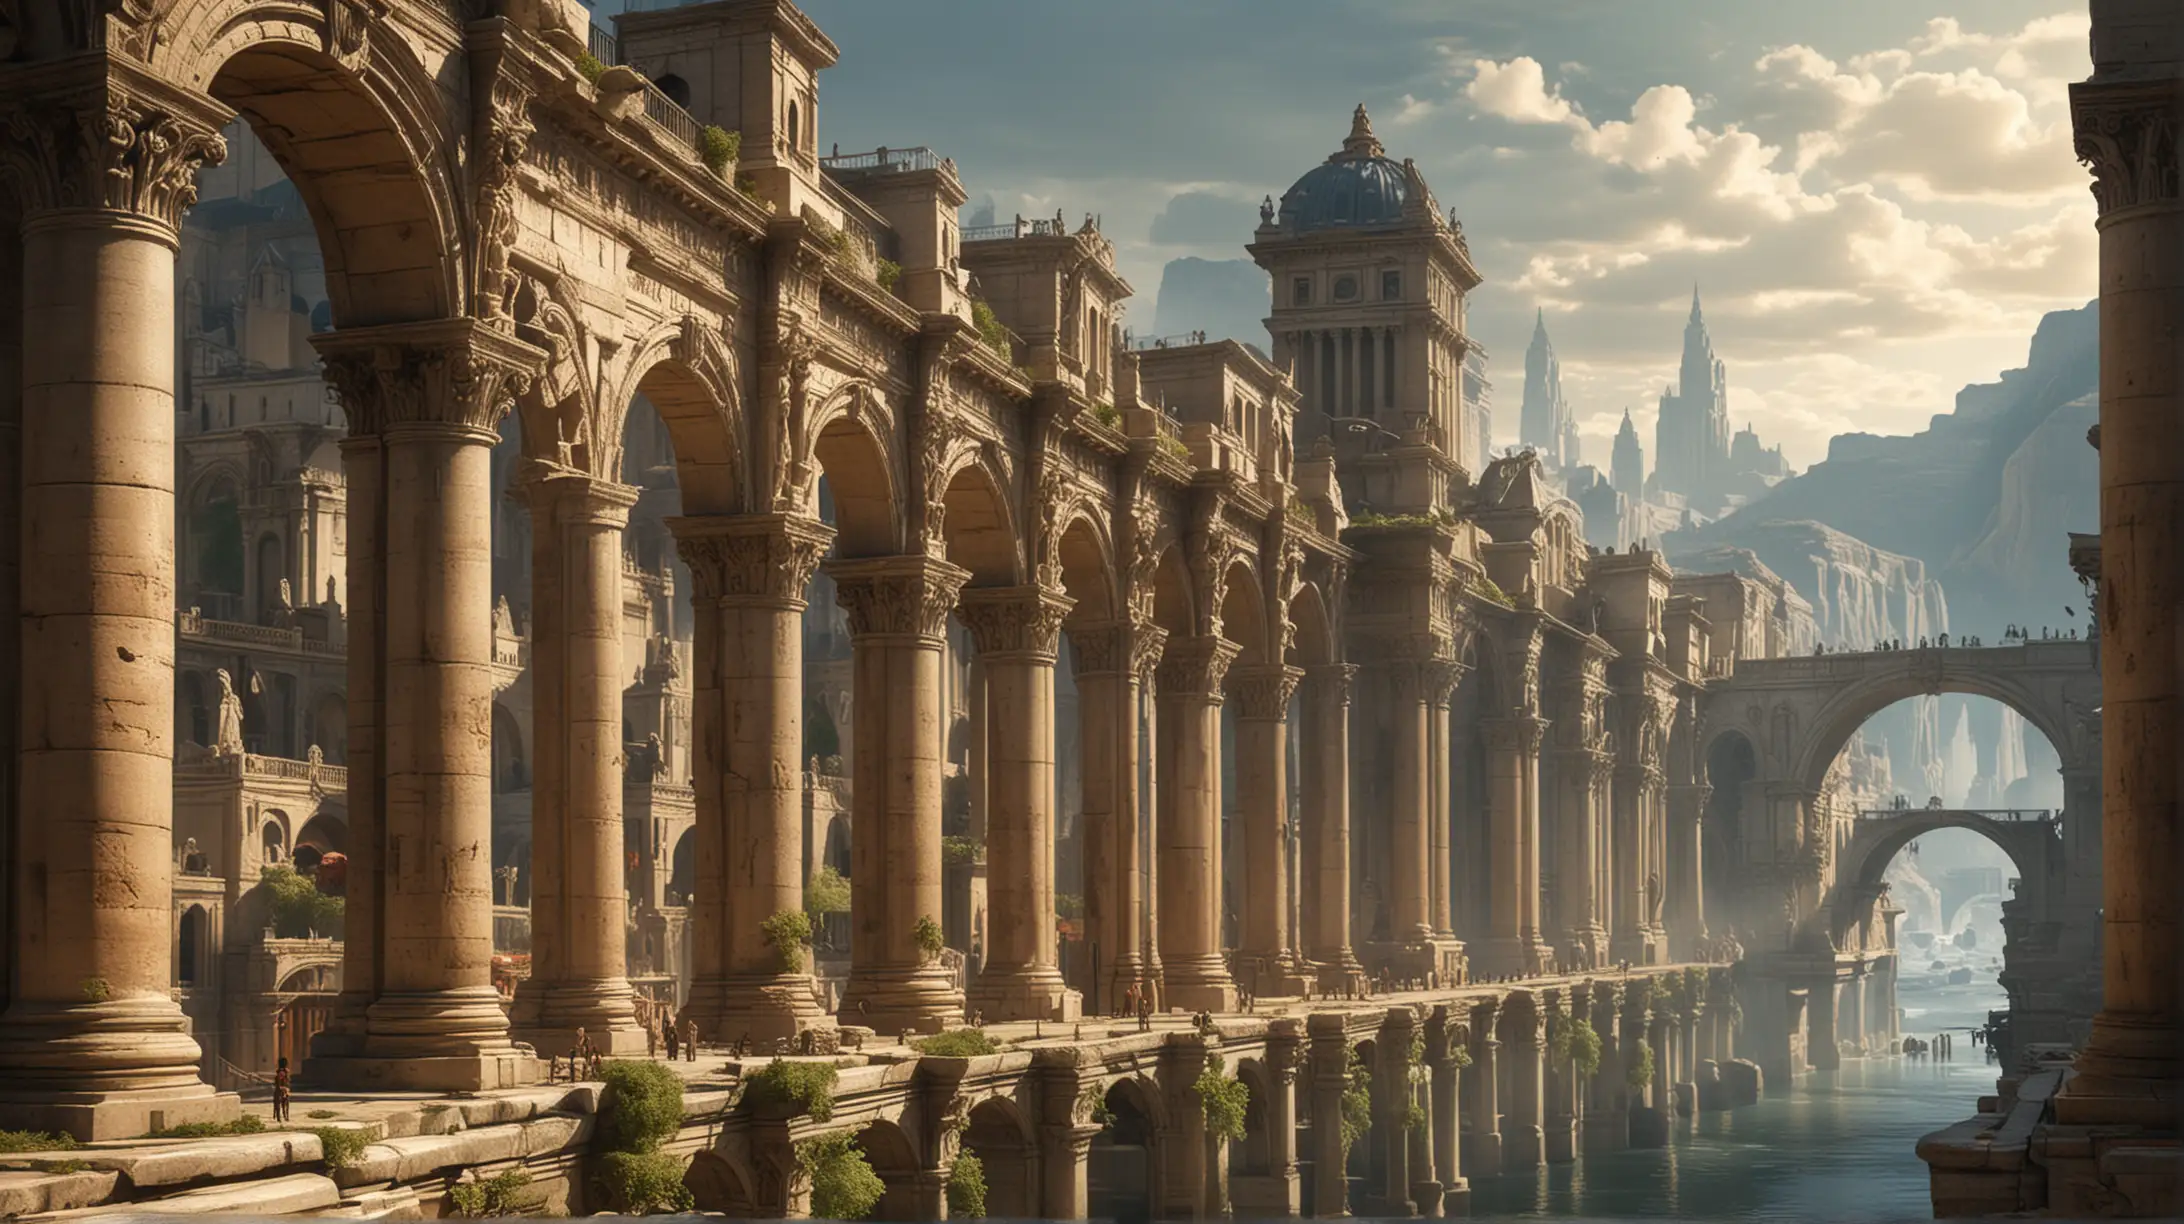 Majestic polychromous Roman city made more extravagant for a hgih fantasy setting. From street level Colonnades.

In focus: Grand central citdael, on a river island.
Enormous Temples in around the city. 
Arching columned bridges overhead.

A single mountain range in the distance.